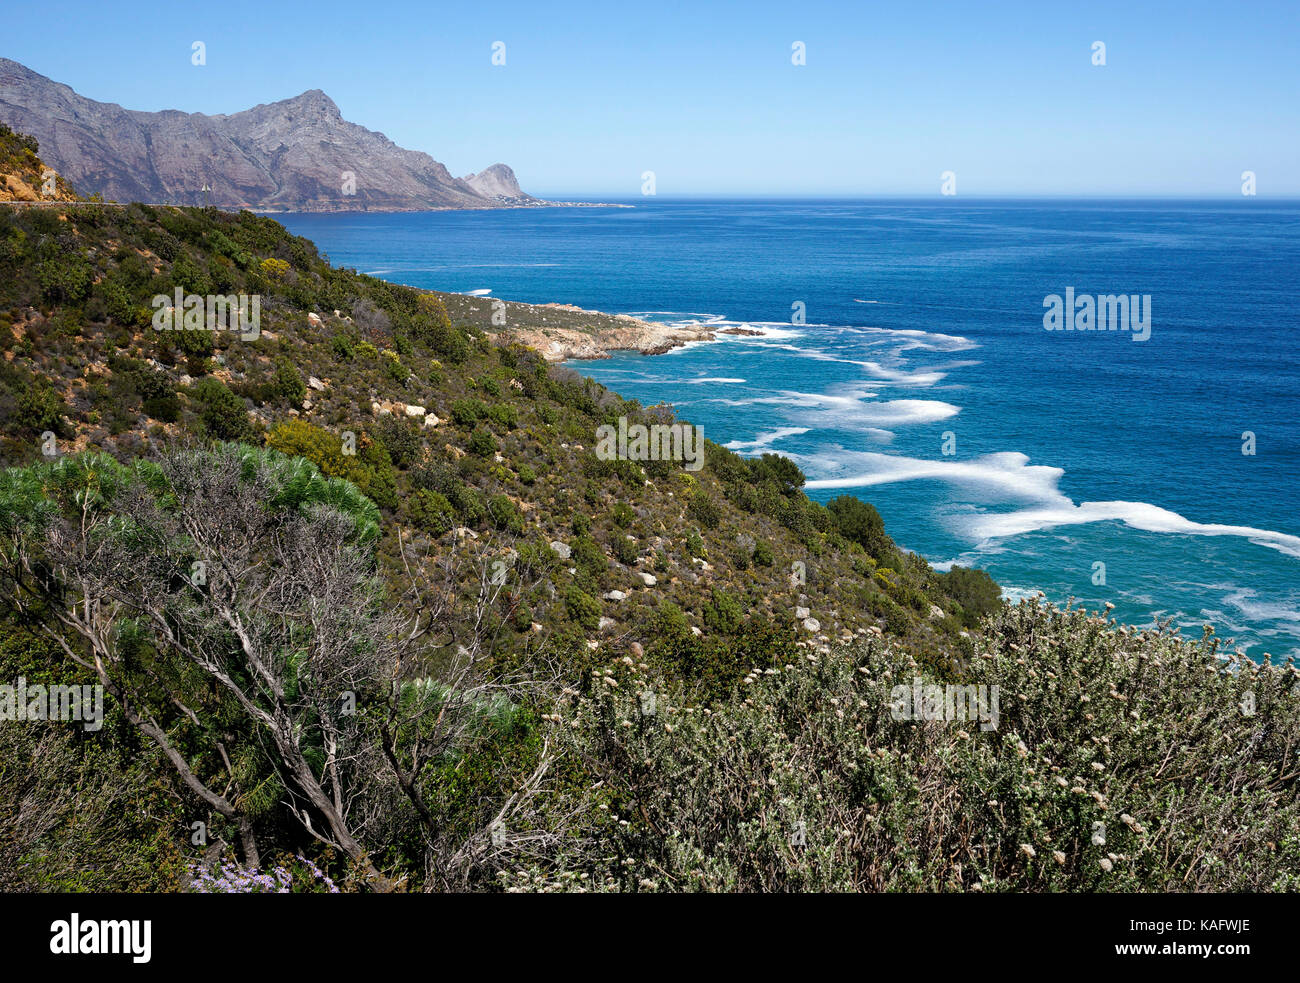 False Bay with Rooi Els in the background, Western Province, South Africa. Stock Photo